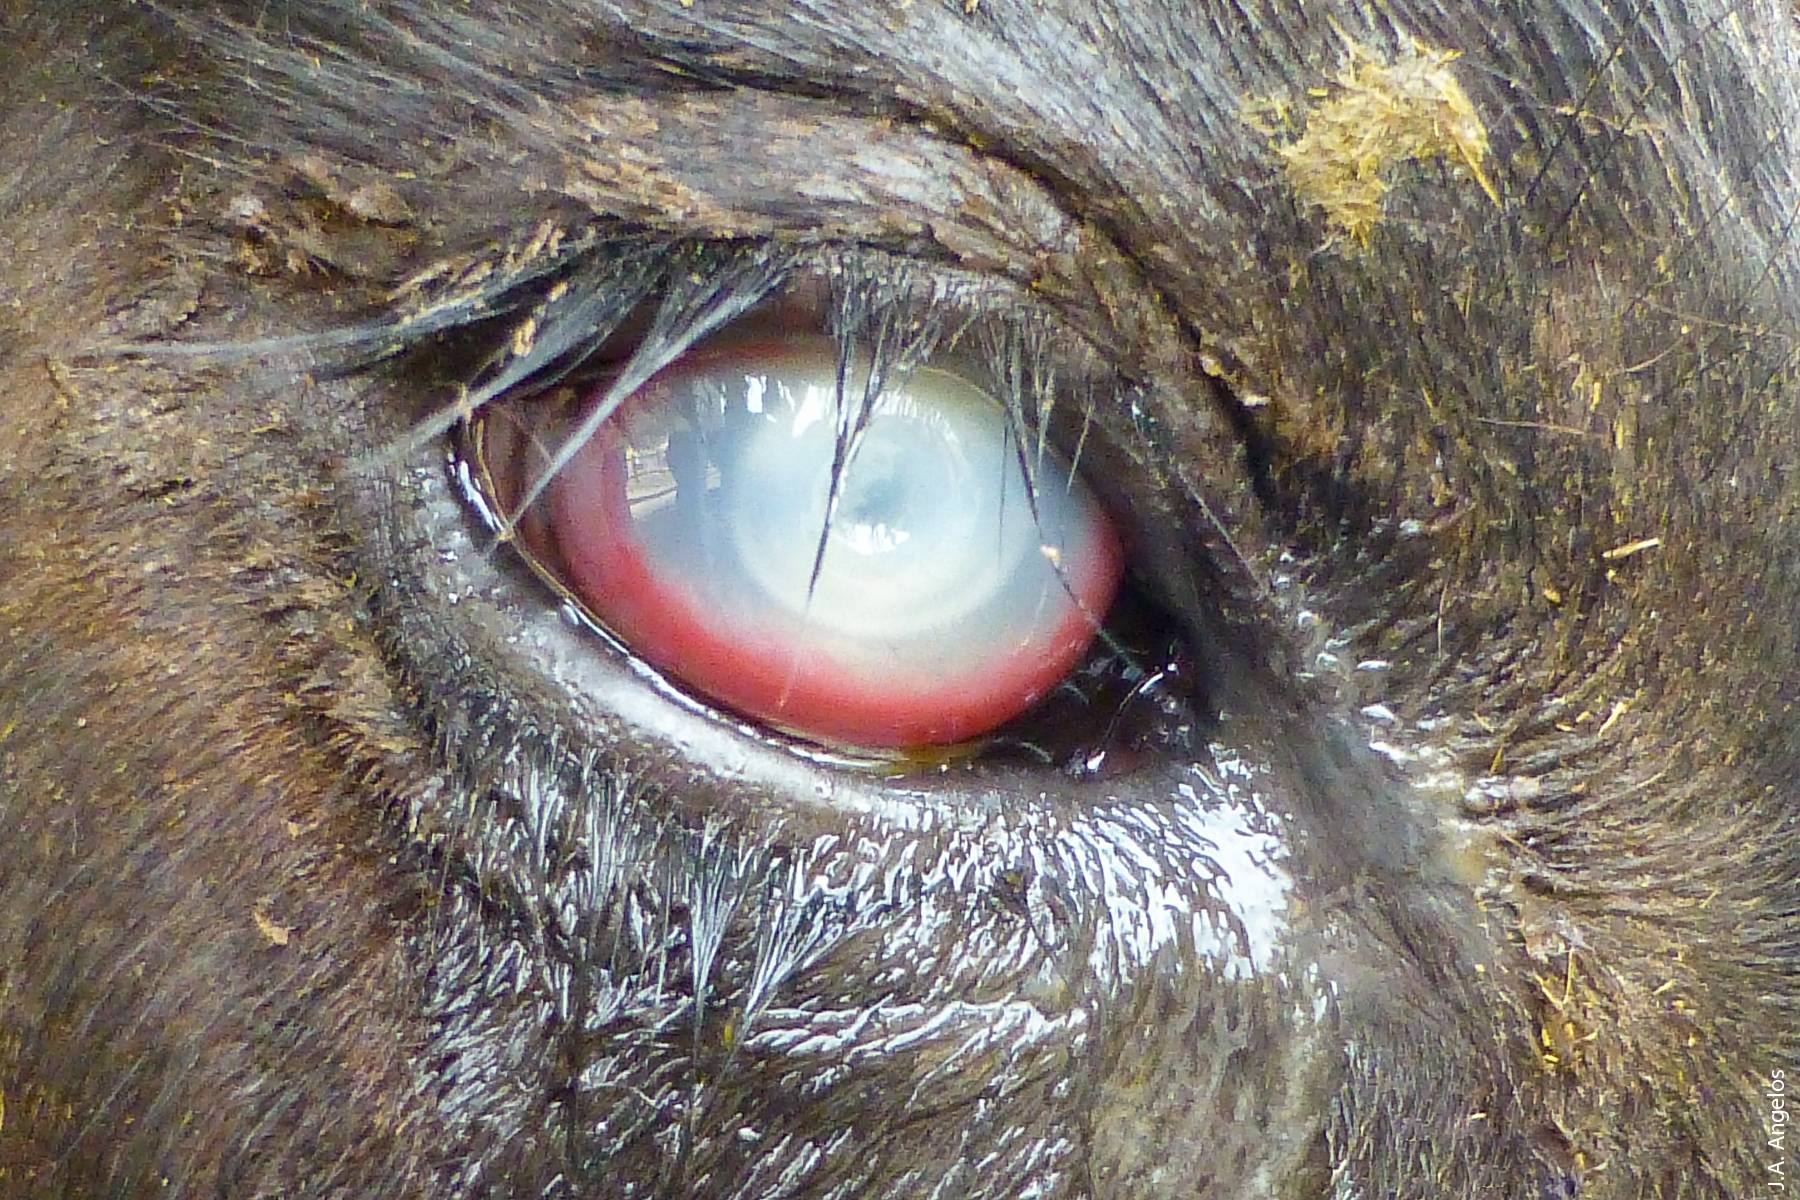 Bovine pinkeye, the most common eye disease of cattle worldwide, affects not only the conjunctiva surrounding the eye, but also the cornea itself, and in severe cases causes blindness.